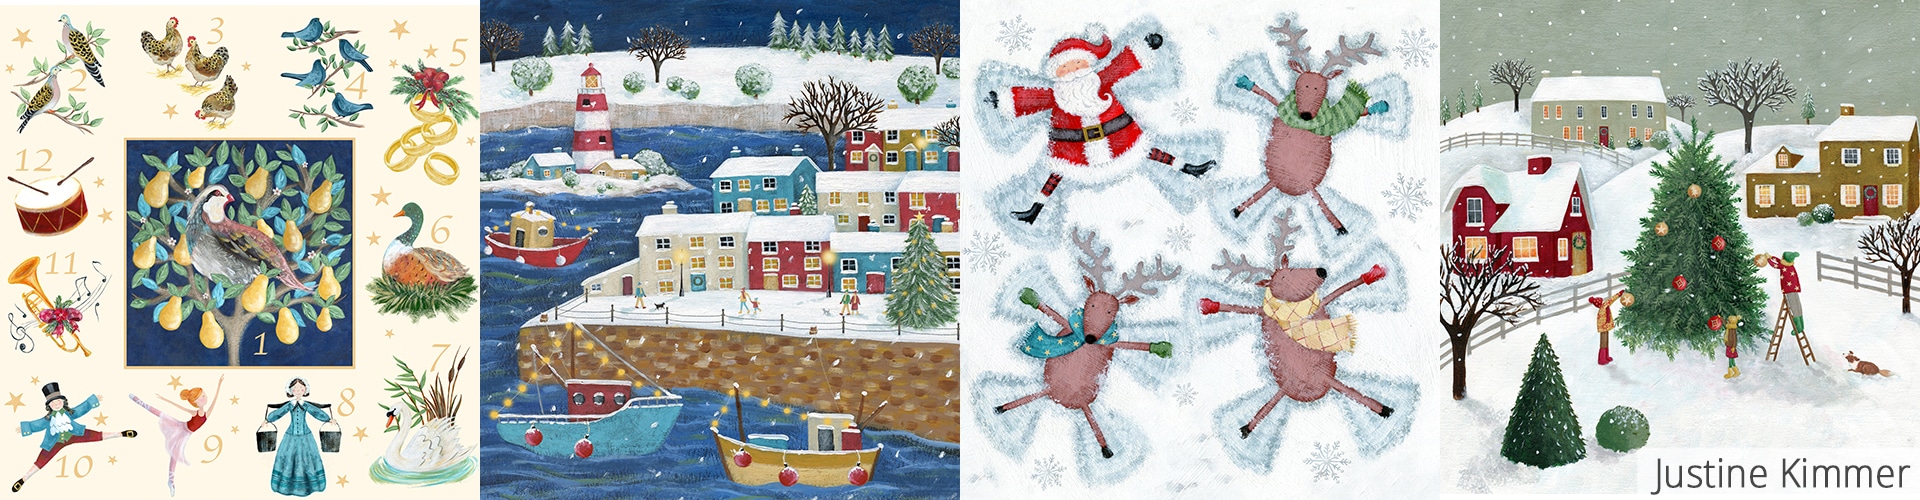 A selection of Christmas designs by artist Justine Kimmer for art licensing